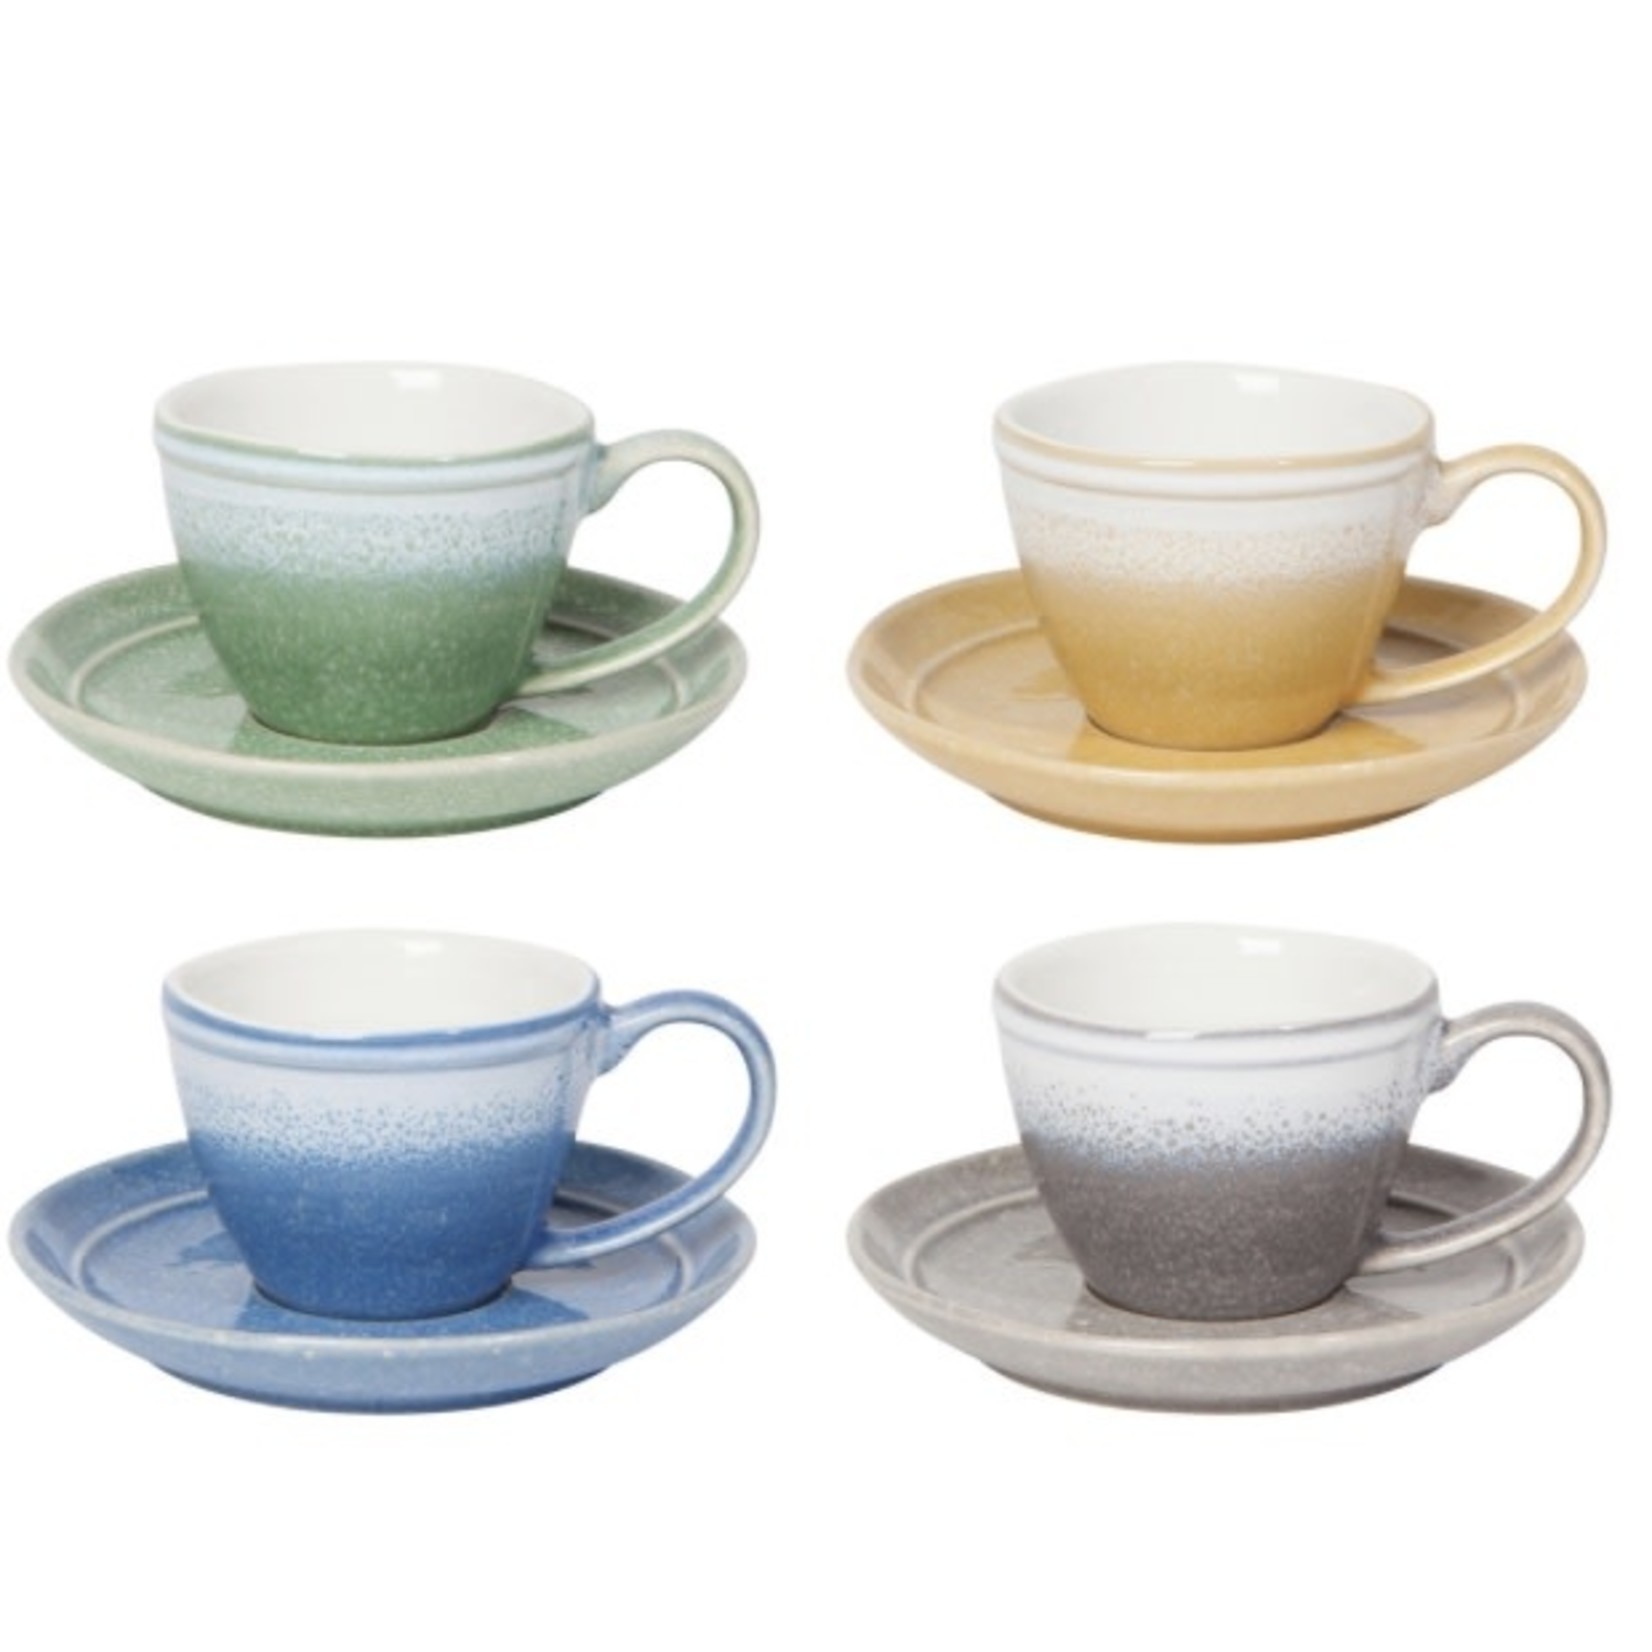 HEIRLOOM By Danica HEIRLOOM Espresso Cup & Saucer Set/4 - Mineral